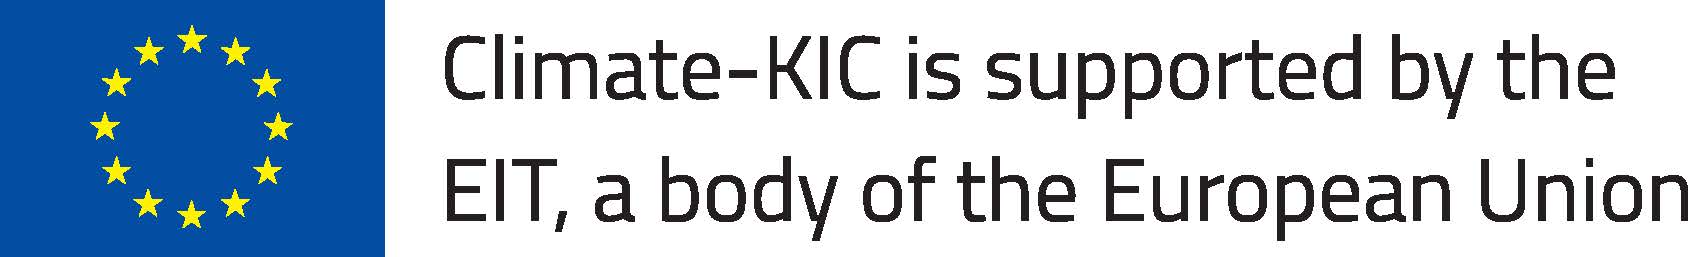 Climate-KIC is supported by the EIT, a body of the European Union.